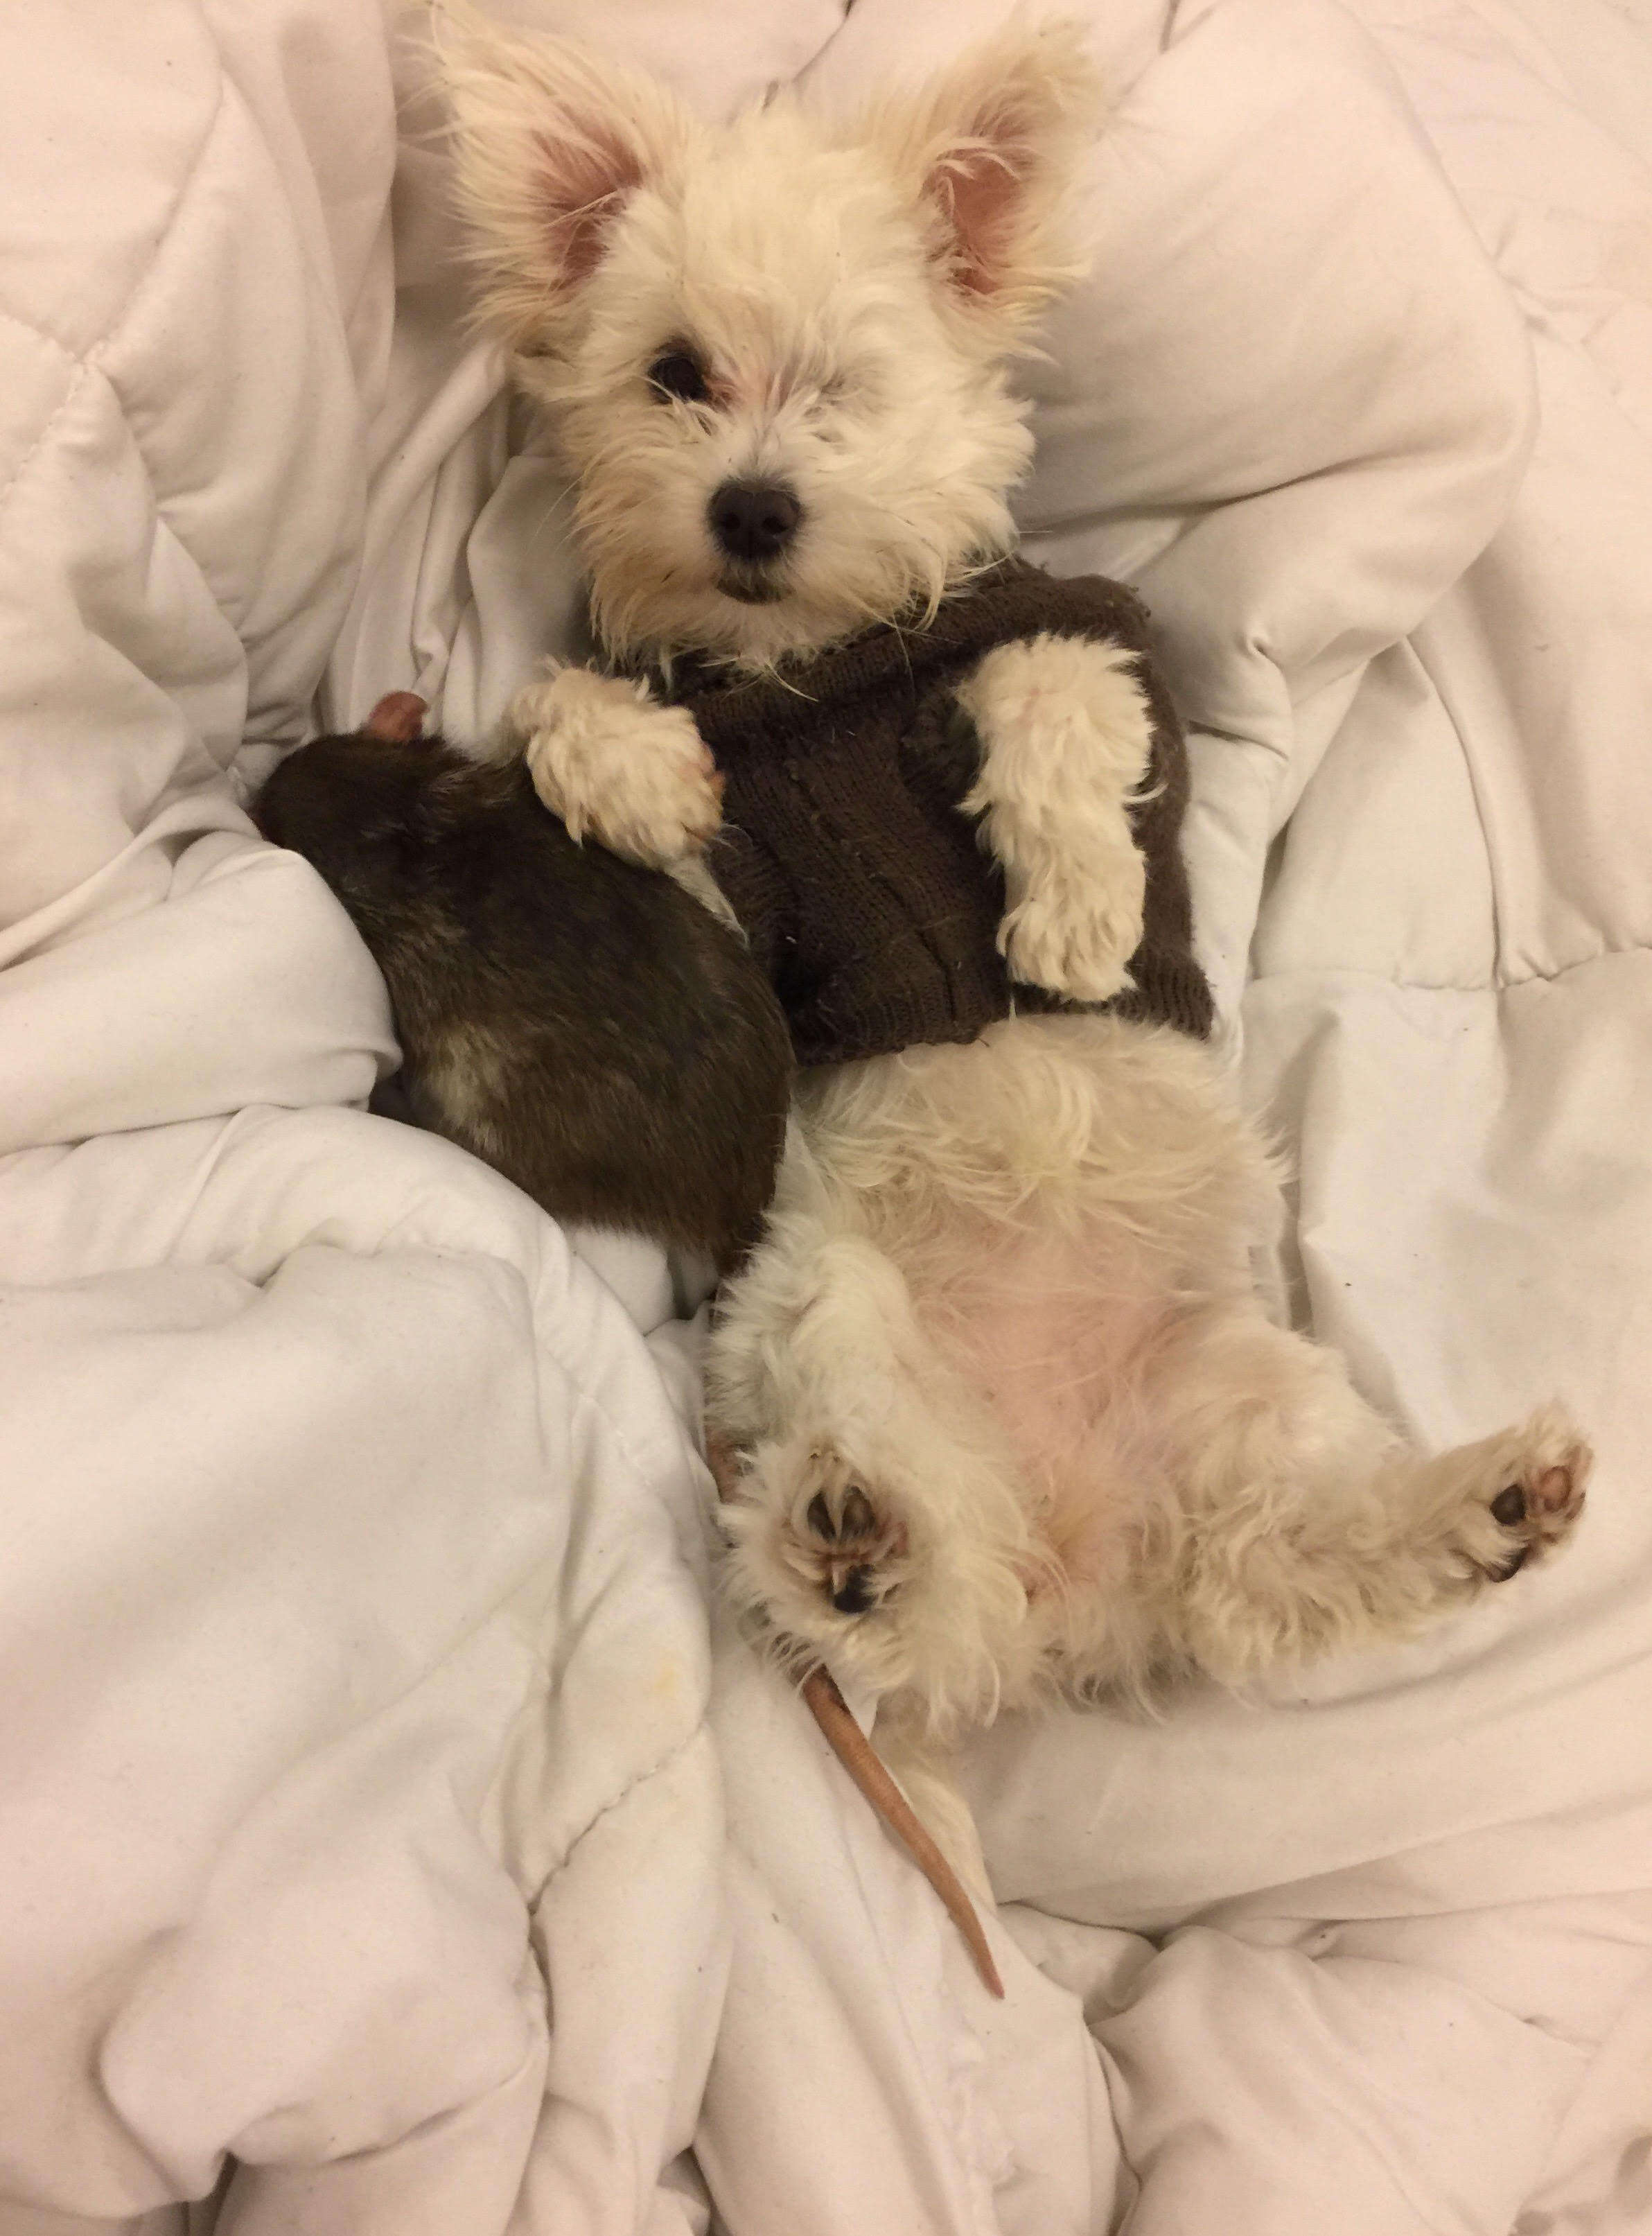 Dog snuggling with rat